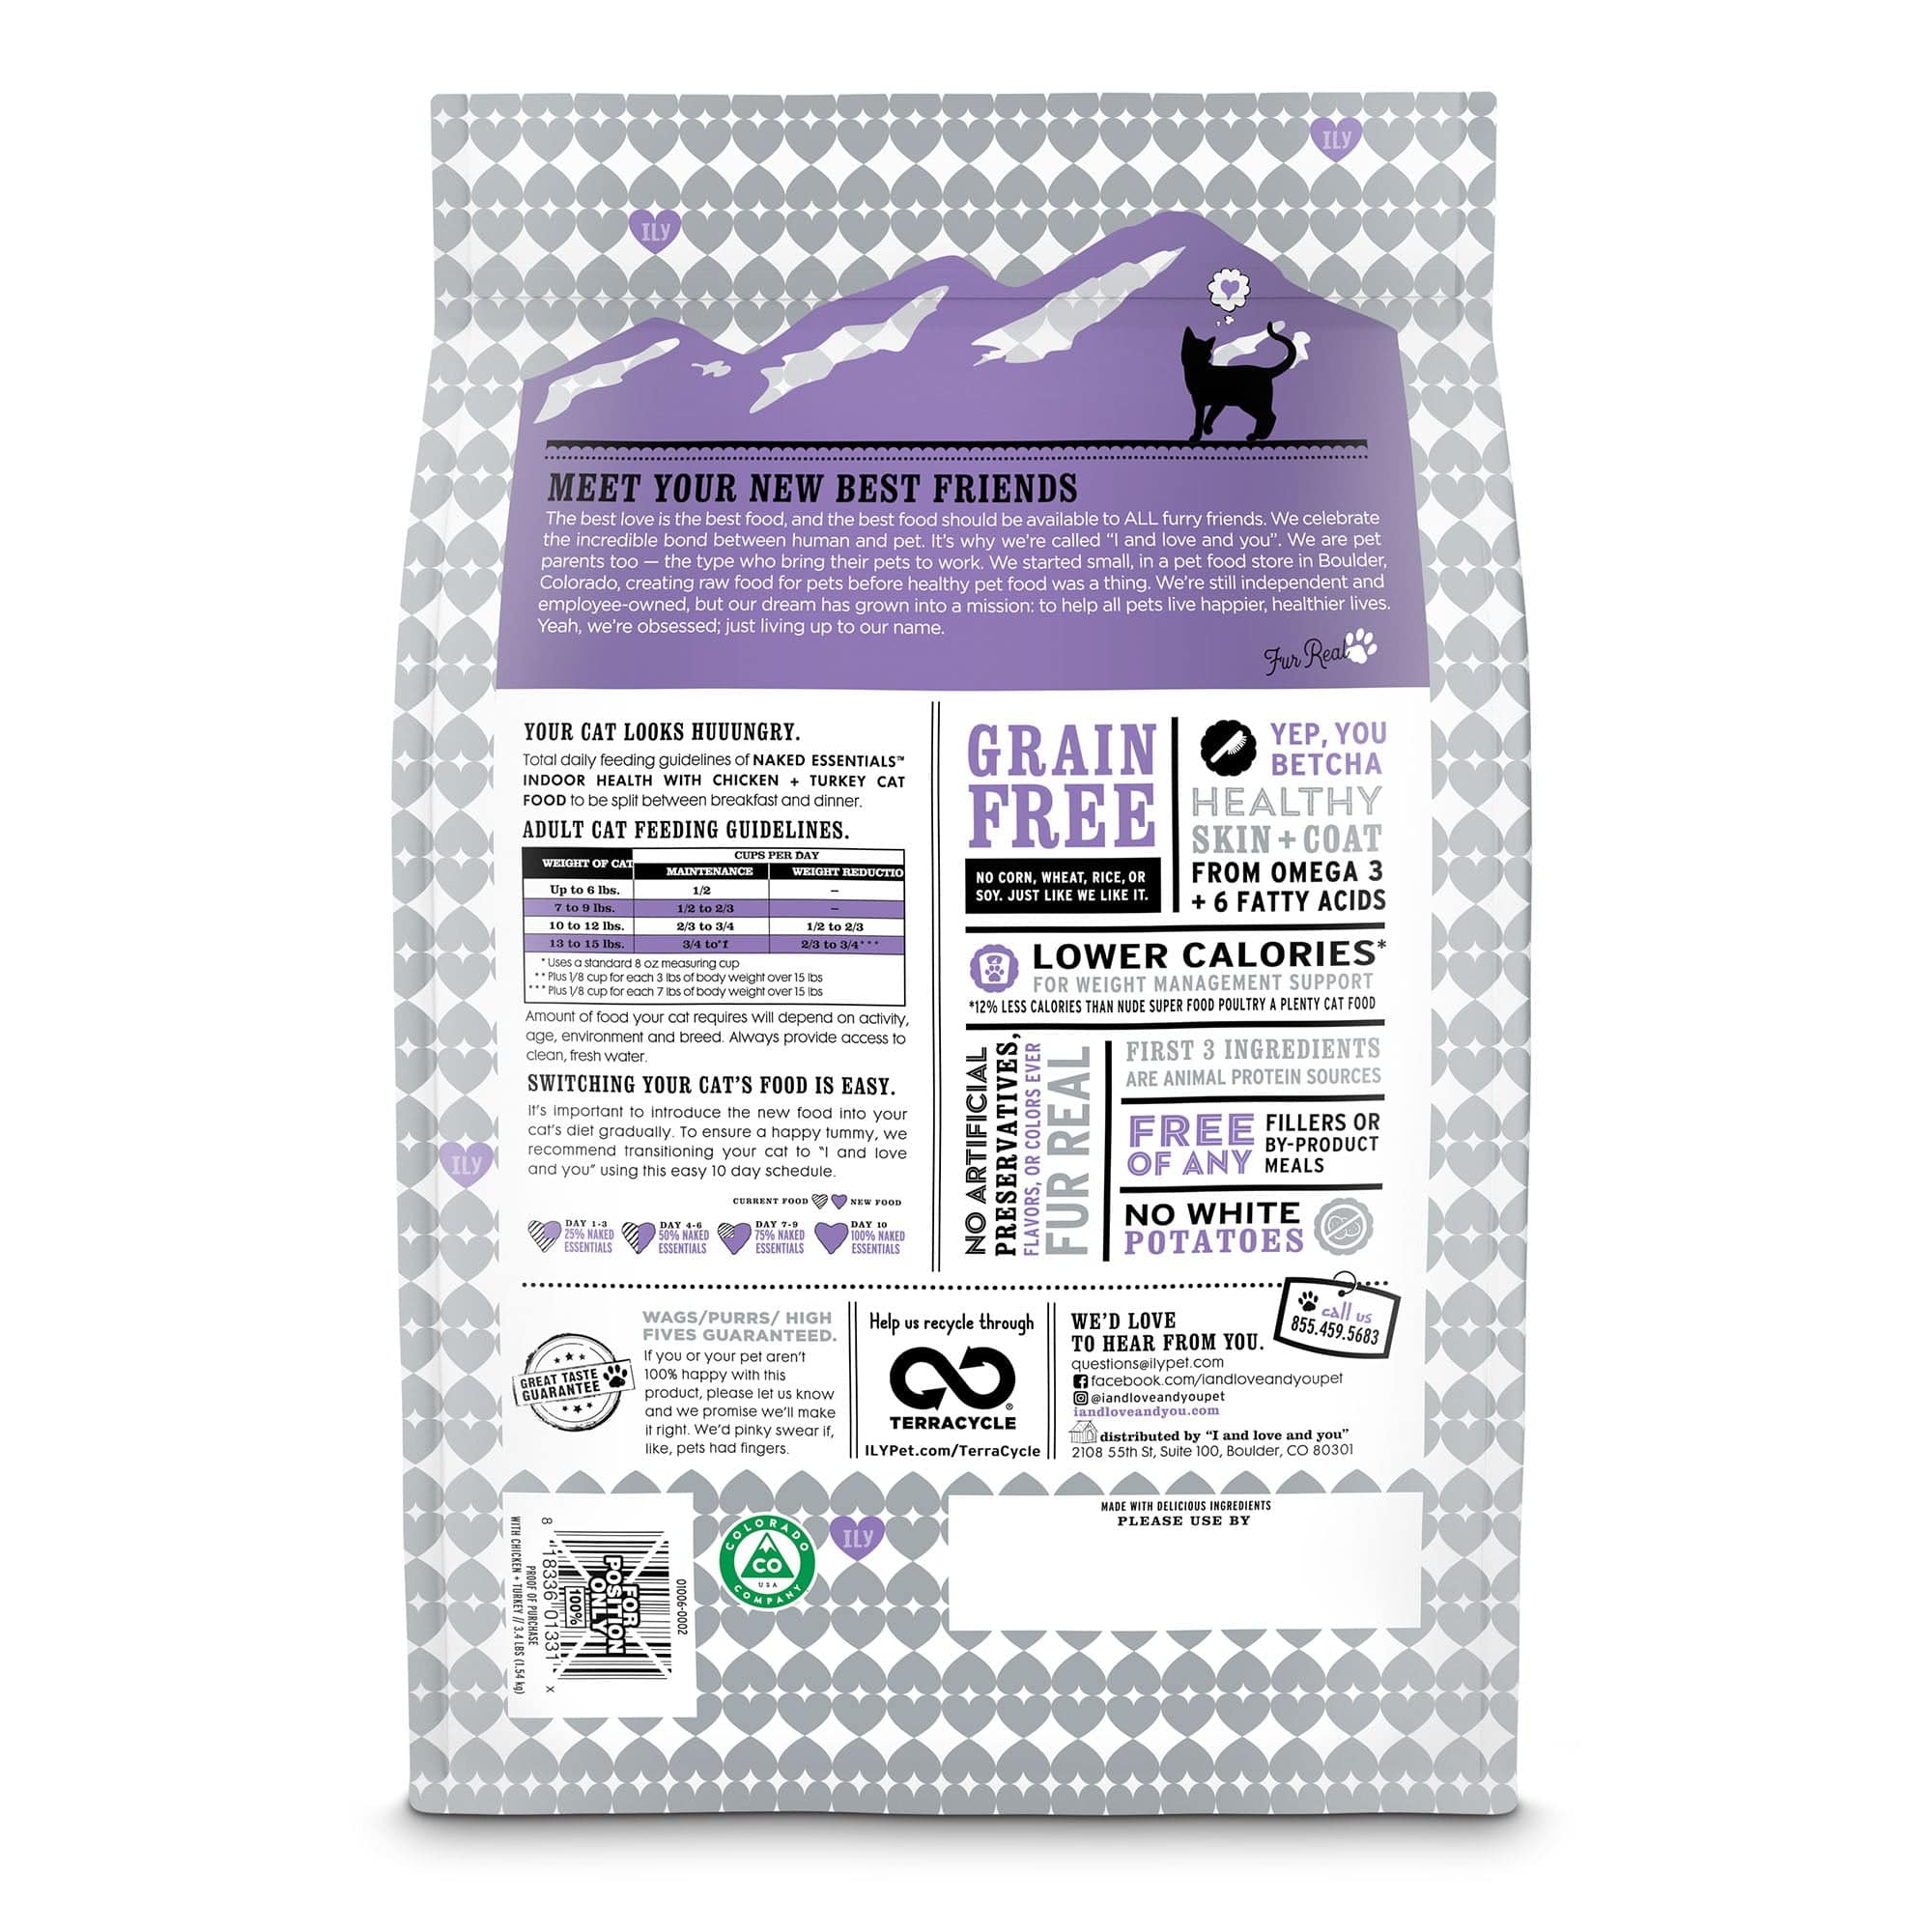 A bag of Naked Essentials Indoor Health kibble with chicken and turkey, featuring a logo, cat, and paw print stamp.